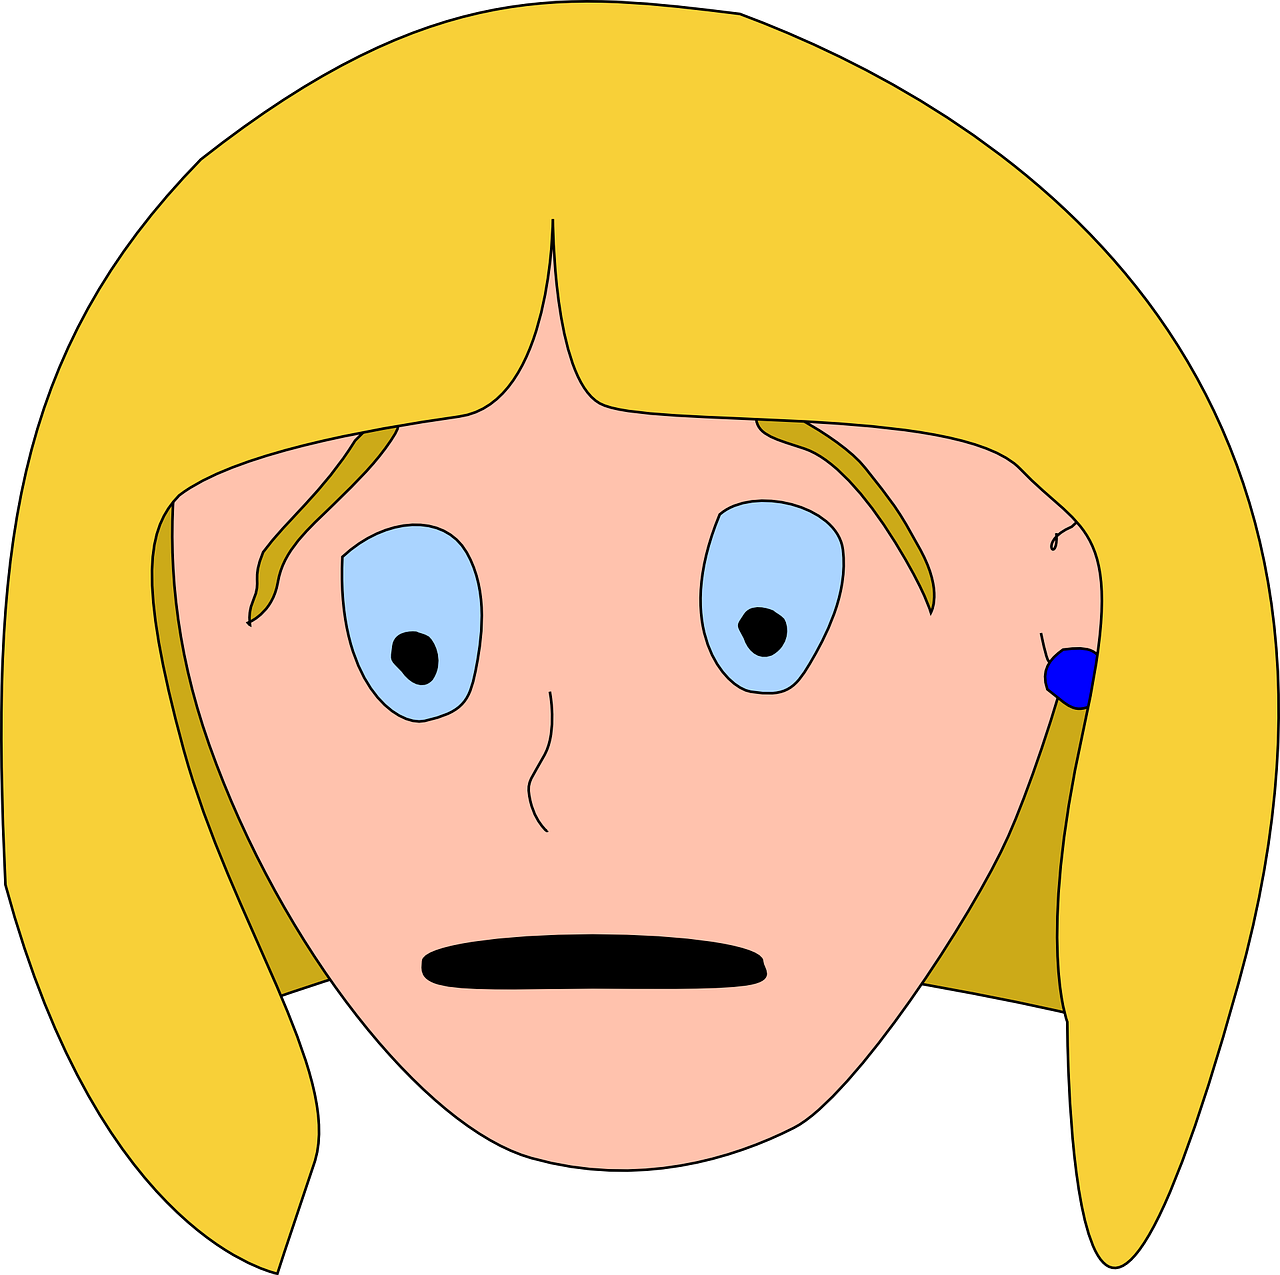 a woman with blonde hair and blue eyes, a cartoon, inspired by INO, pixabay, mingei, scared face, !!! very coherent!!! vector art, child, such disappointment